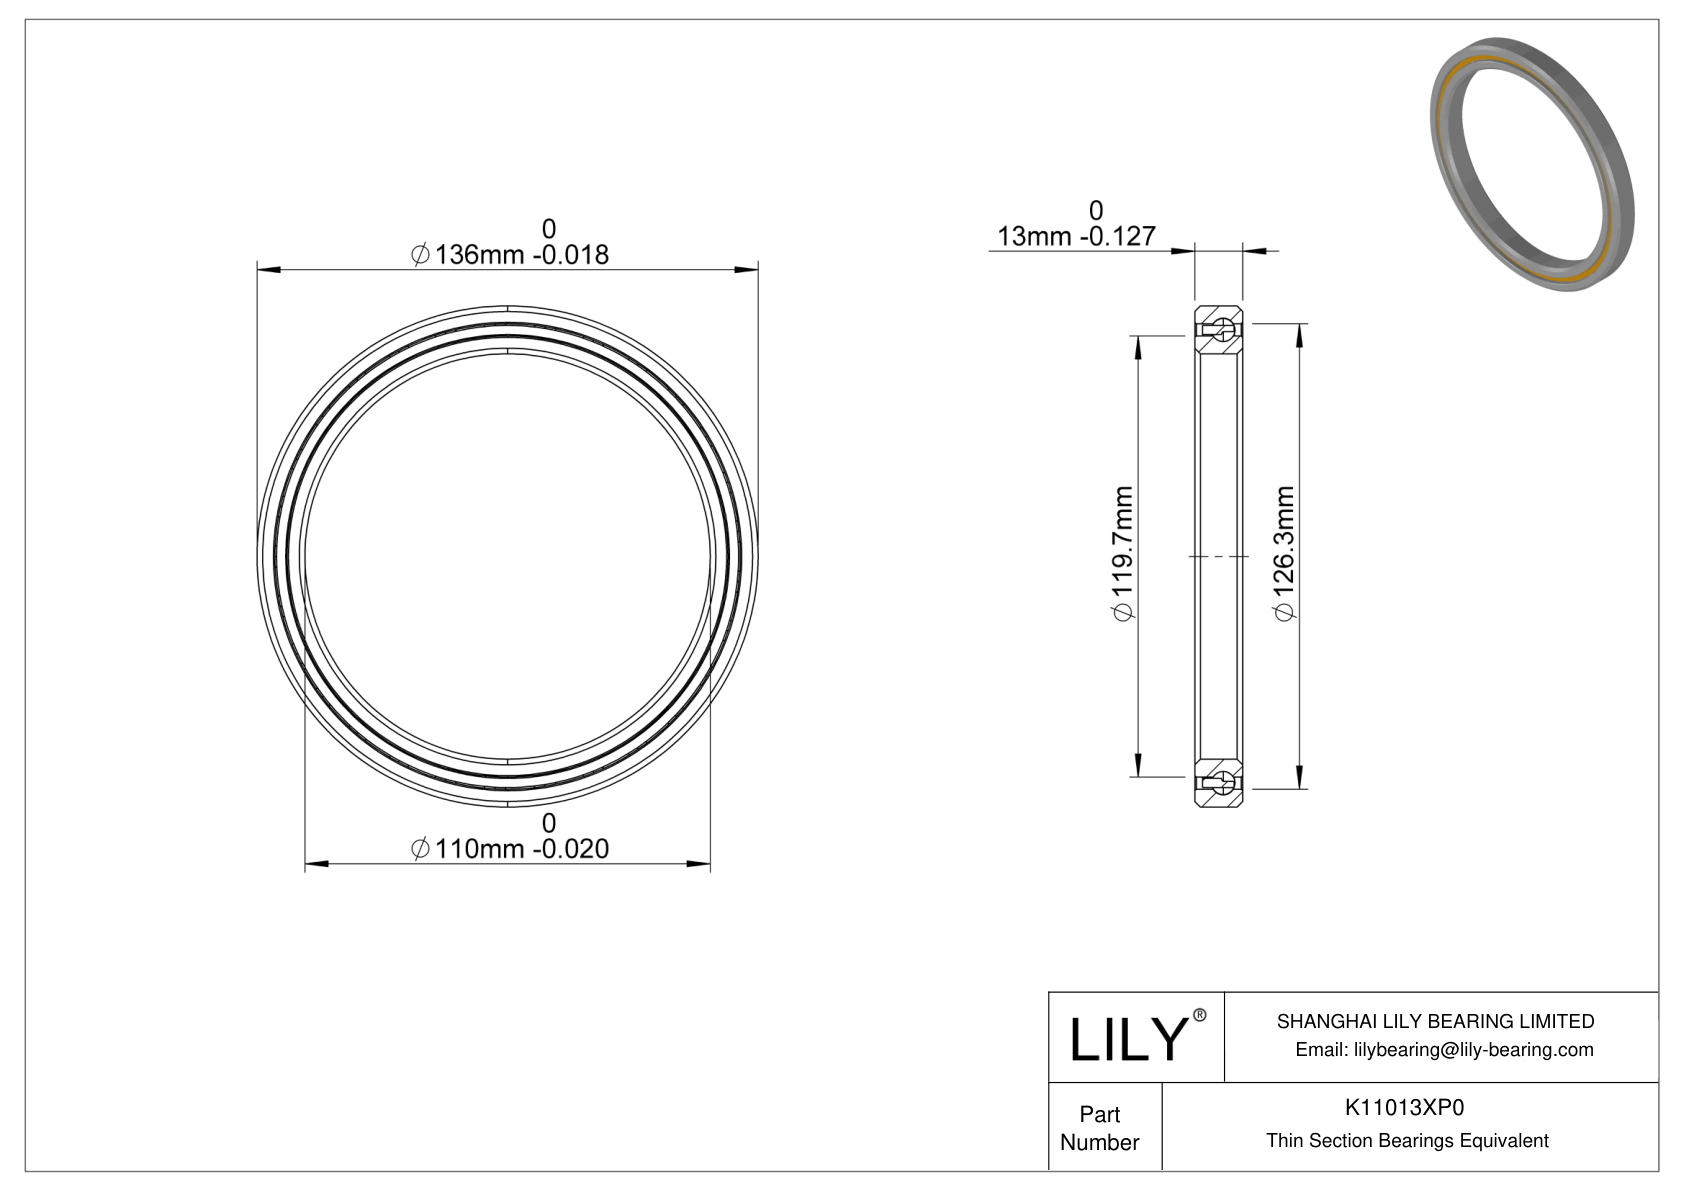 K11013XP0 Constant Section (CS) Bearings cad drawing